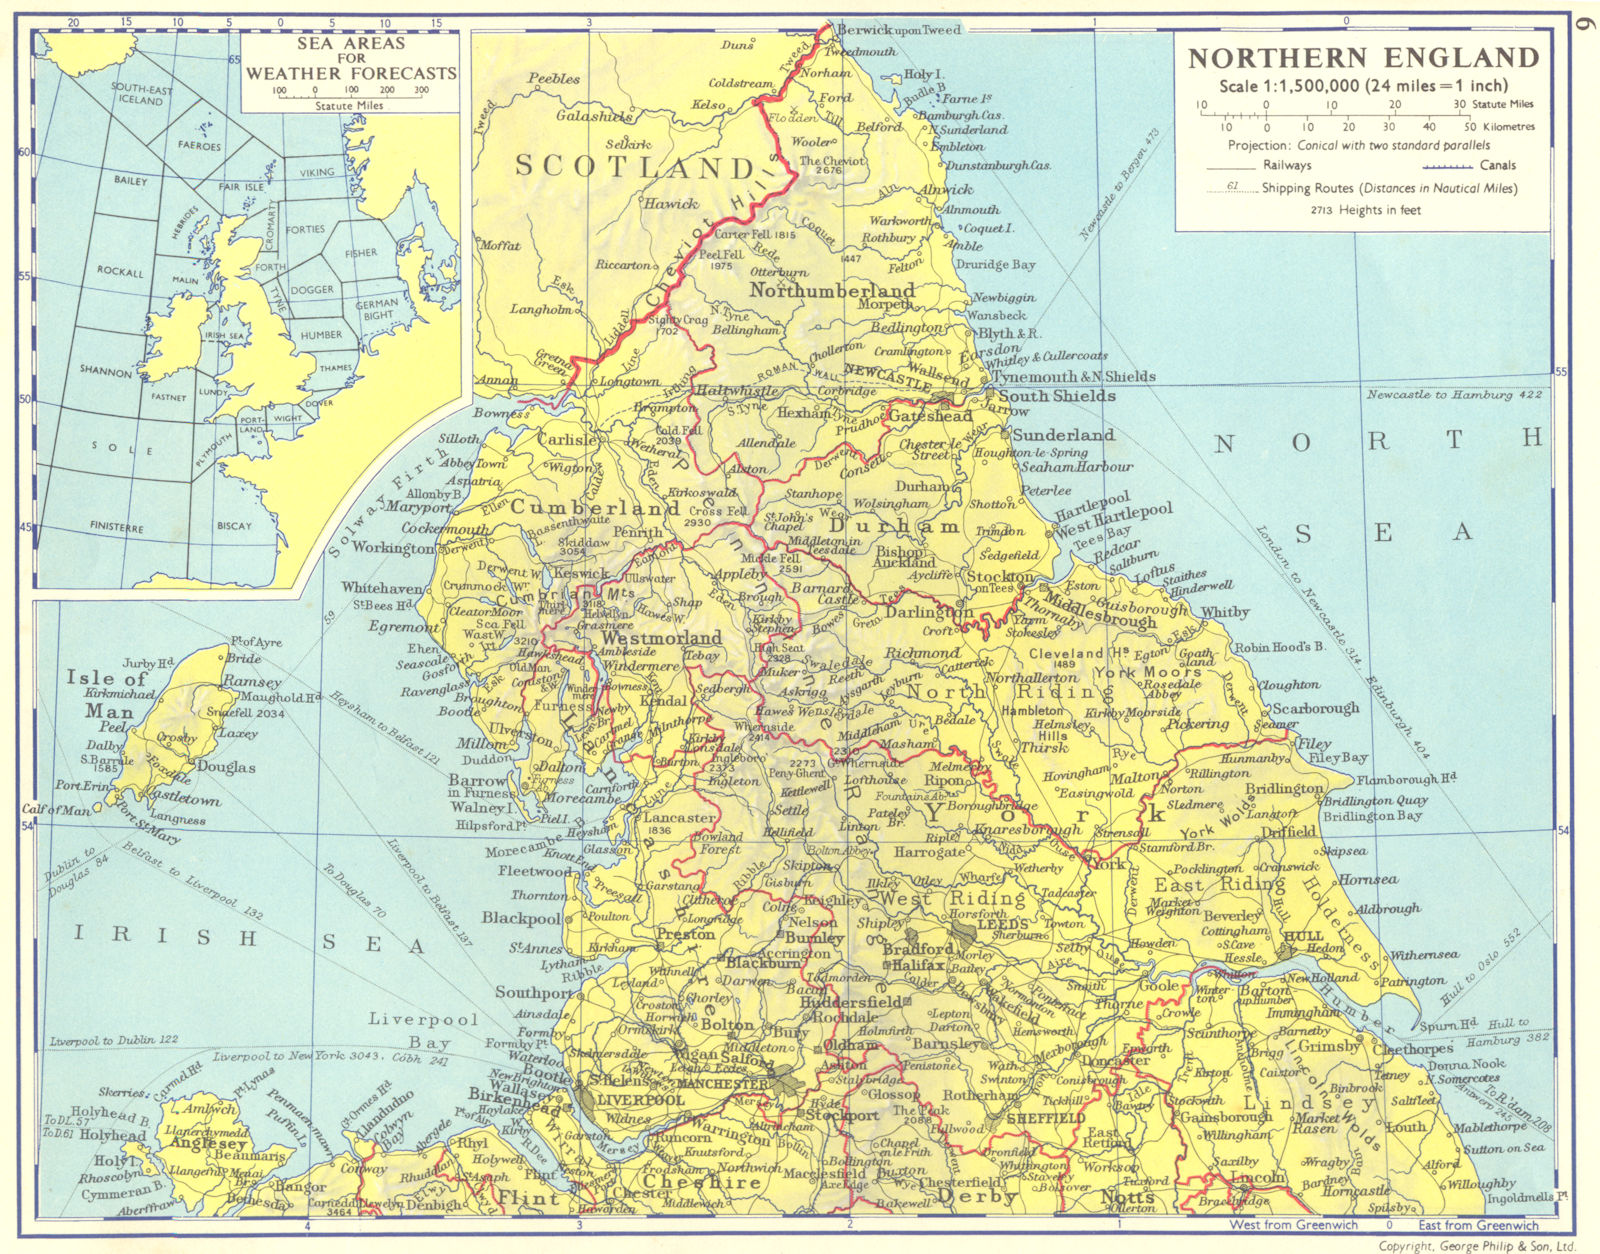 Associate Product ENGLAND. Northern England; Inset UK sea areas for weather forecasts 1962 map